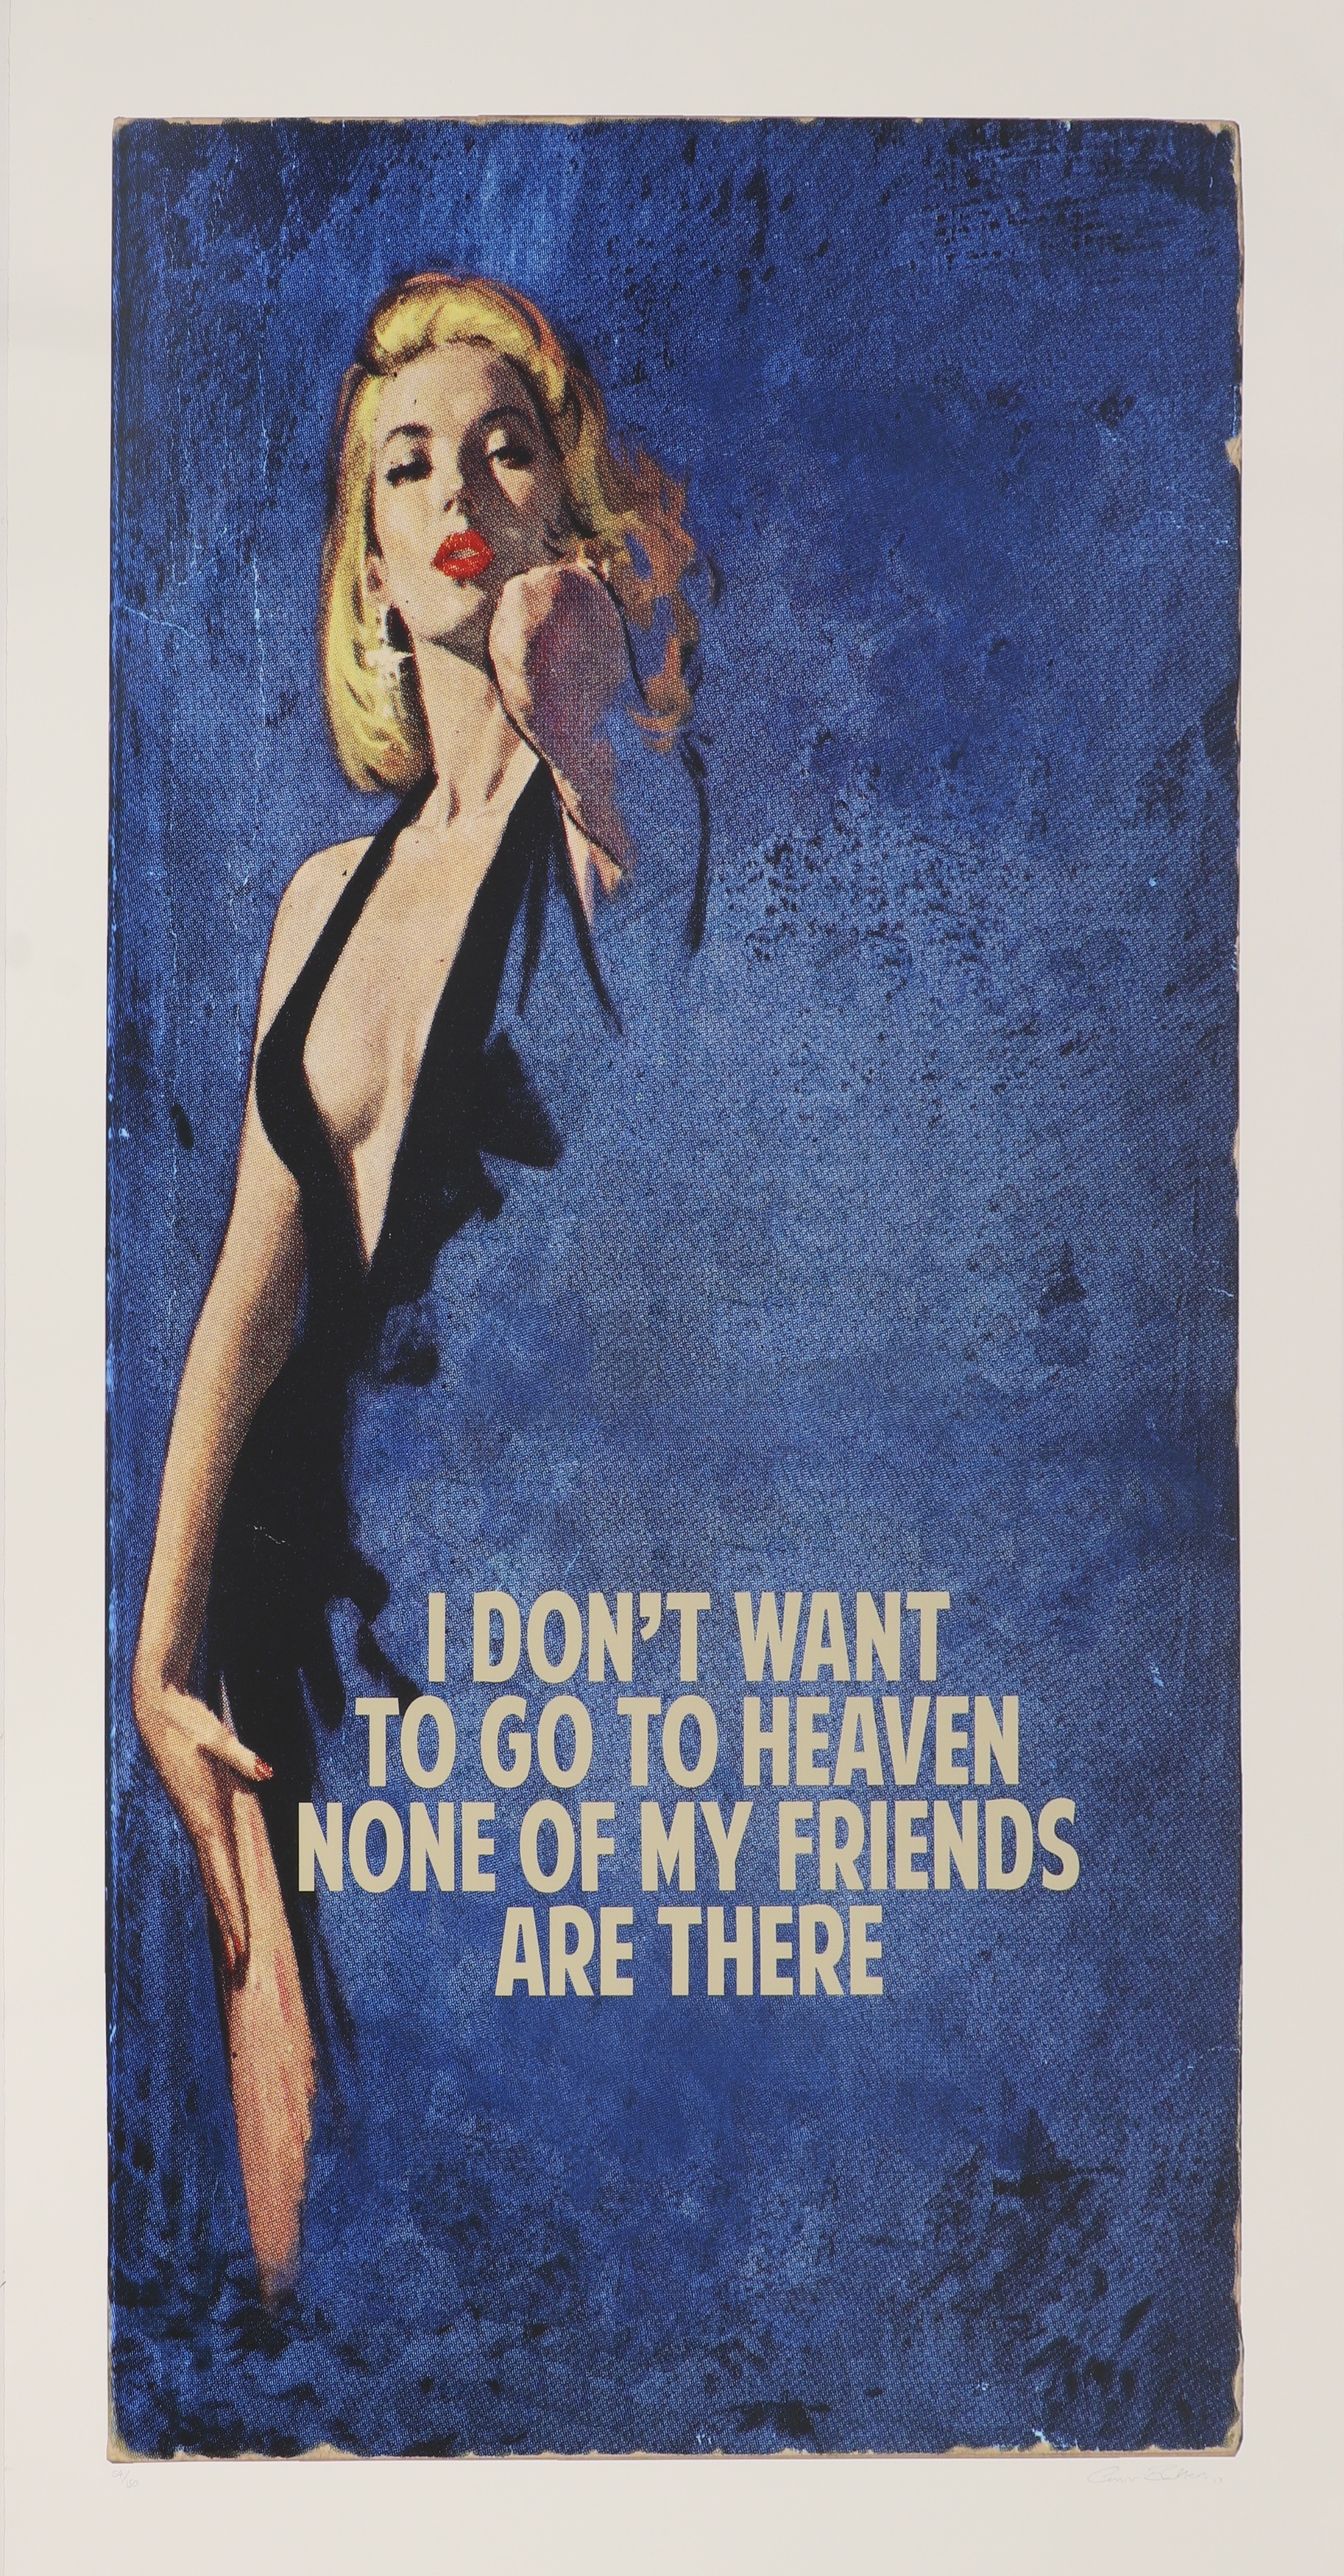 The Connor Brothers (b.1968) 'I Don't Want to Go to Heaven None Of My Friends Are There' giclée print in colours with silkscreen varnish, signed and dated 'Connor Brothers 17' in pencil l.r., and numbered '54/150' l.l. sheet 165.5 x 106.5cm, unframed (£1,500-2,000)